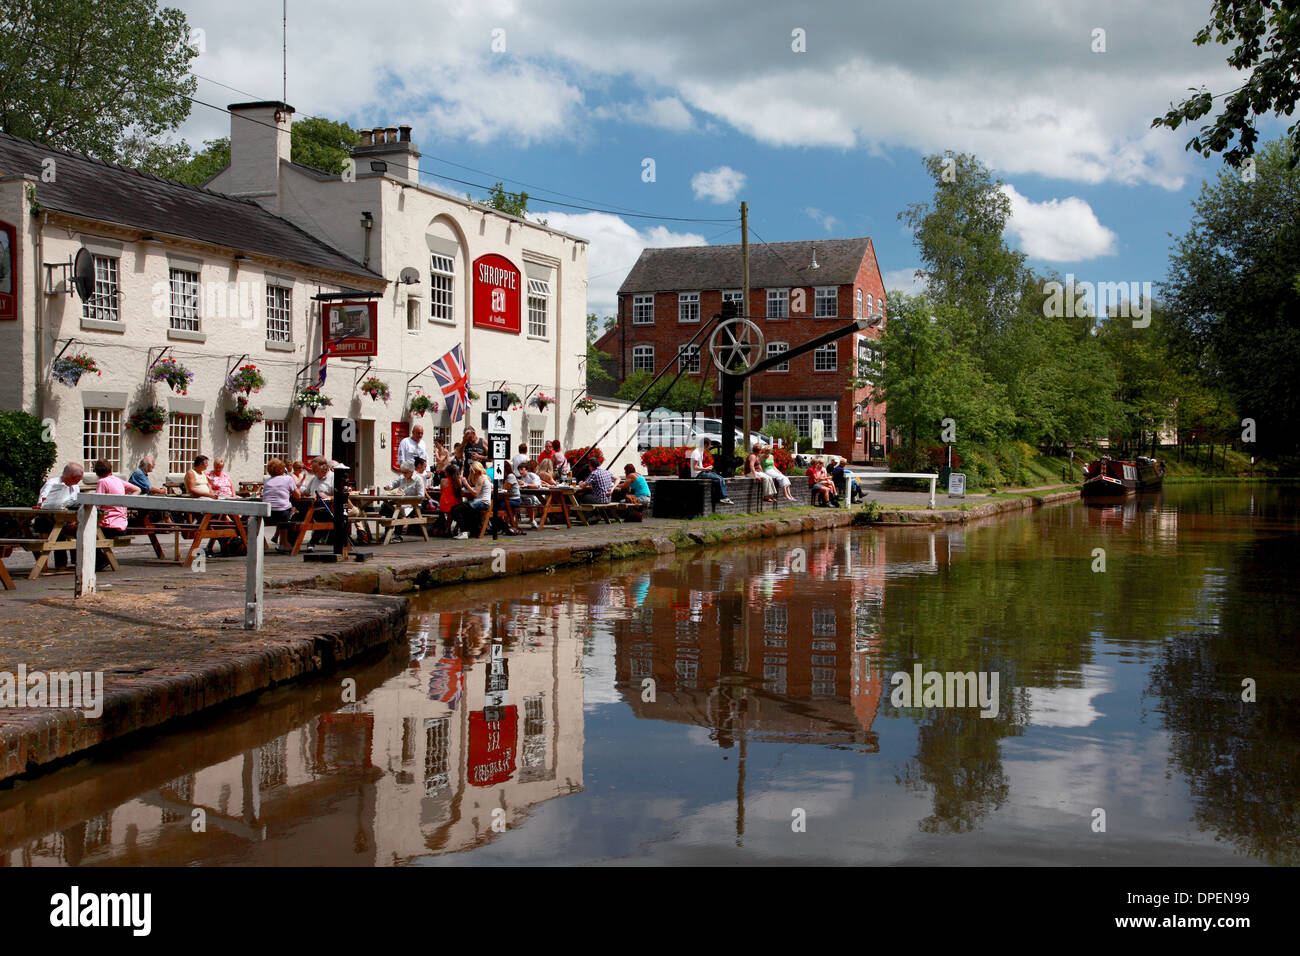 The Shroppie Fly pub and Audlem mill by the Shropshire Union Canal in the village of Audlem, Cheshire Stock Photo